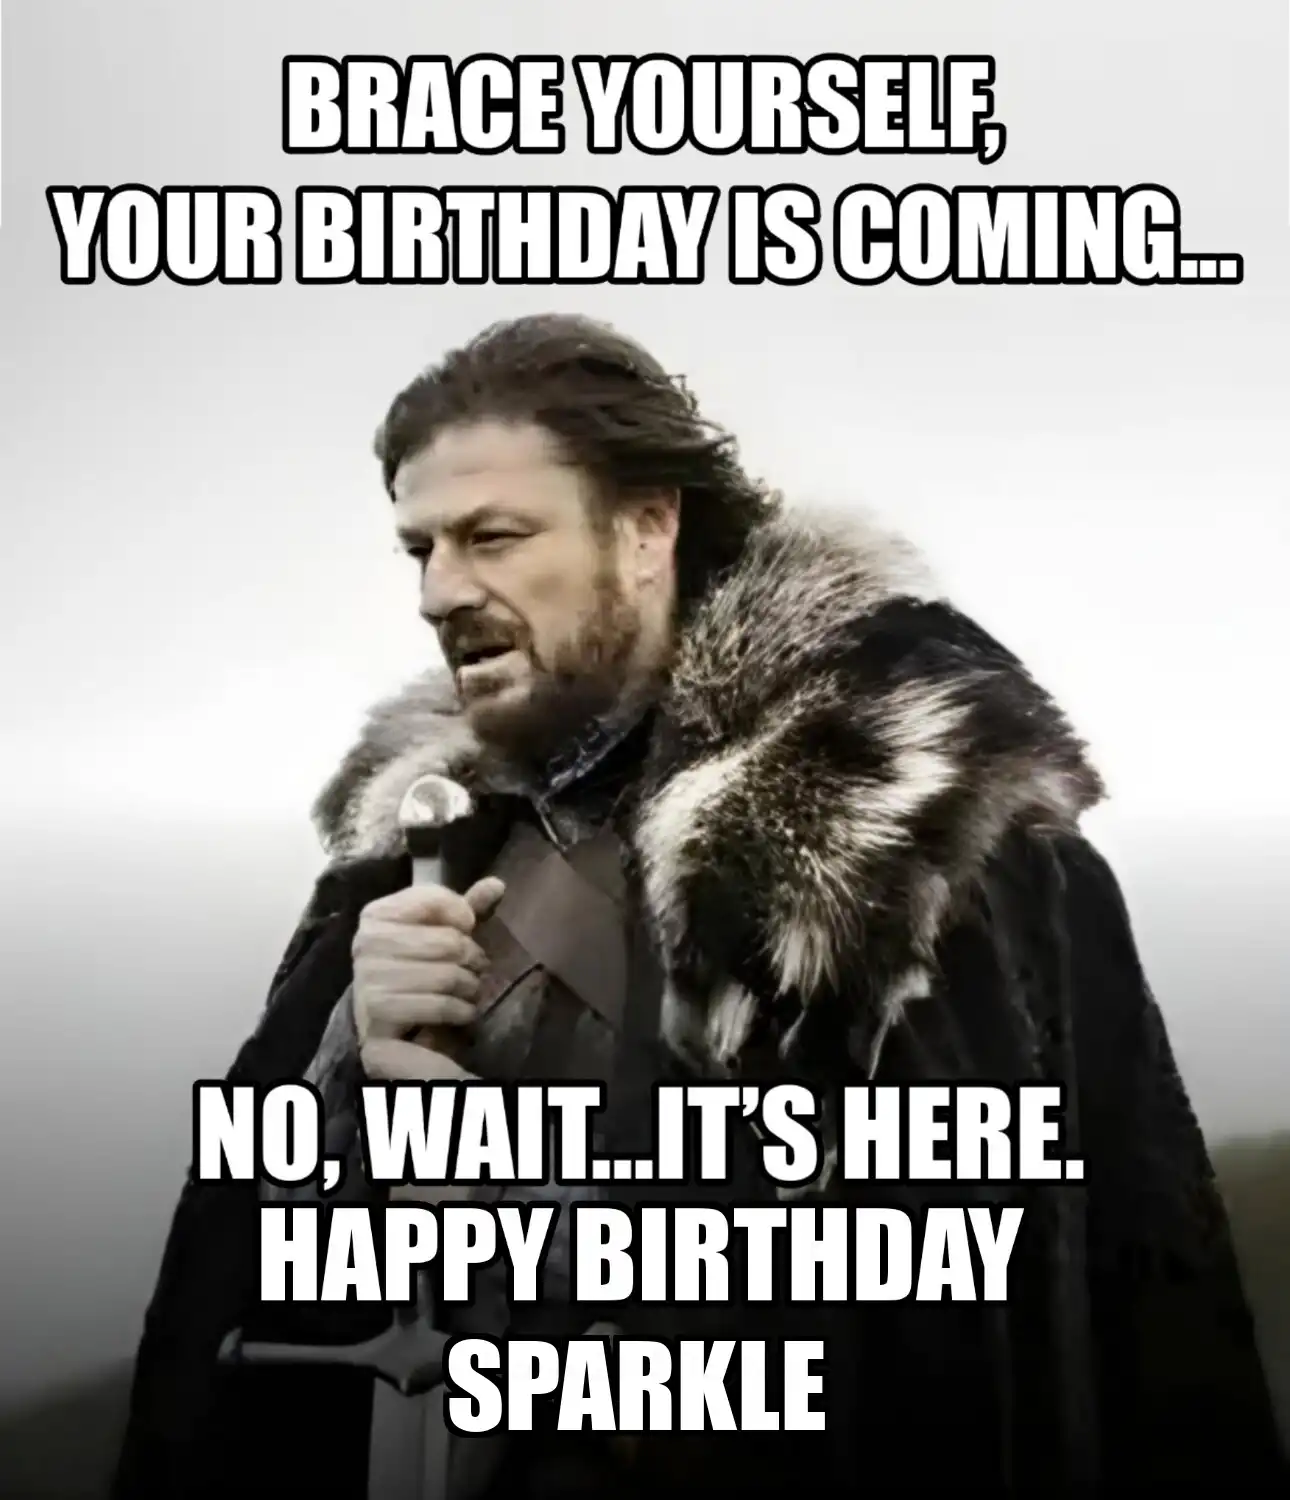 Happy Birthday Sparkle Brace Yourself Your Birthday Is Coming Meme